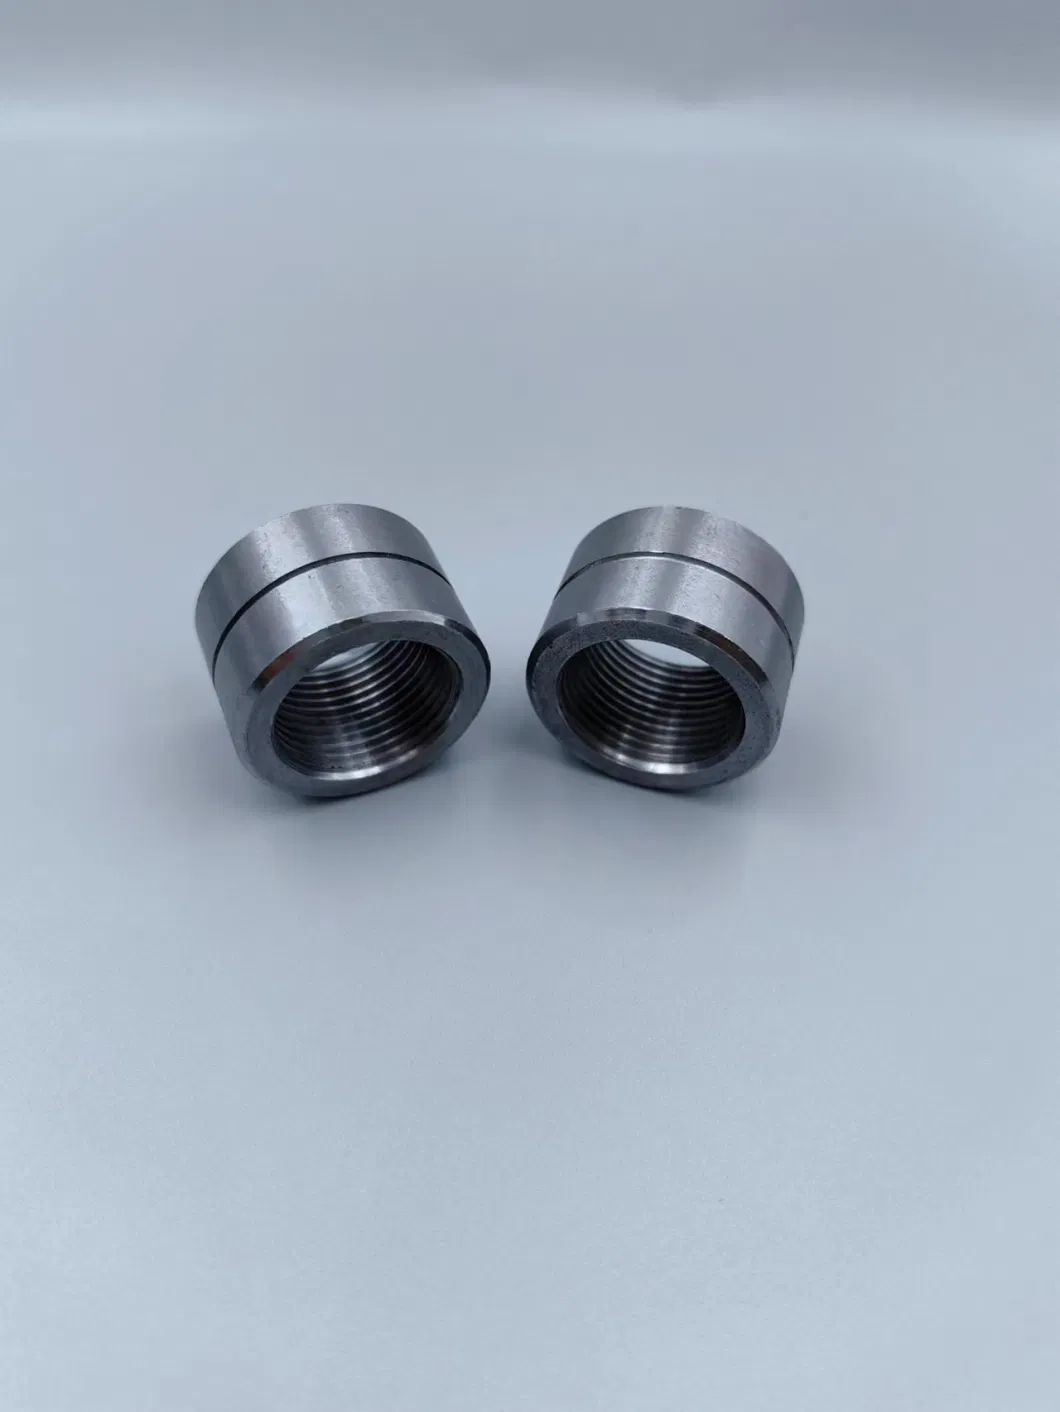 Robust Iron Casting Threaded Bushing for Cylinders